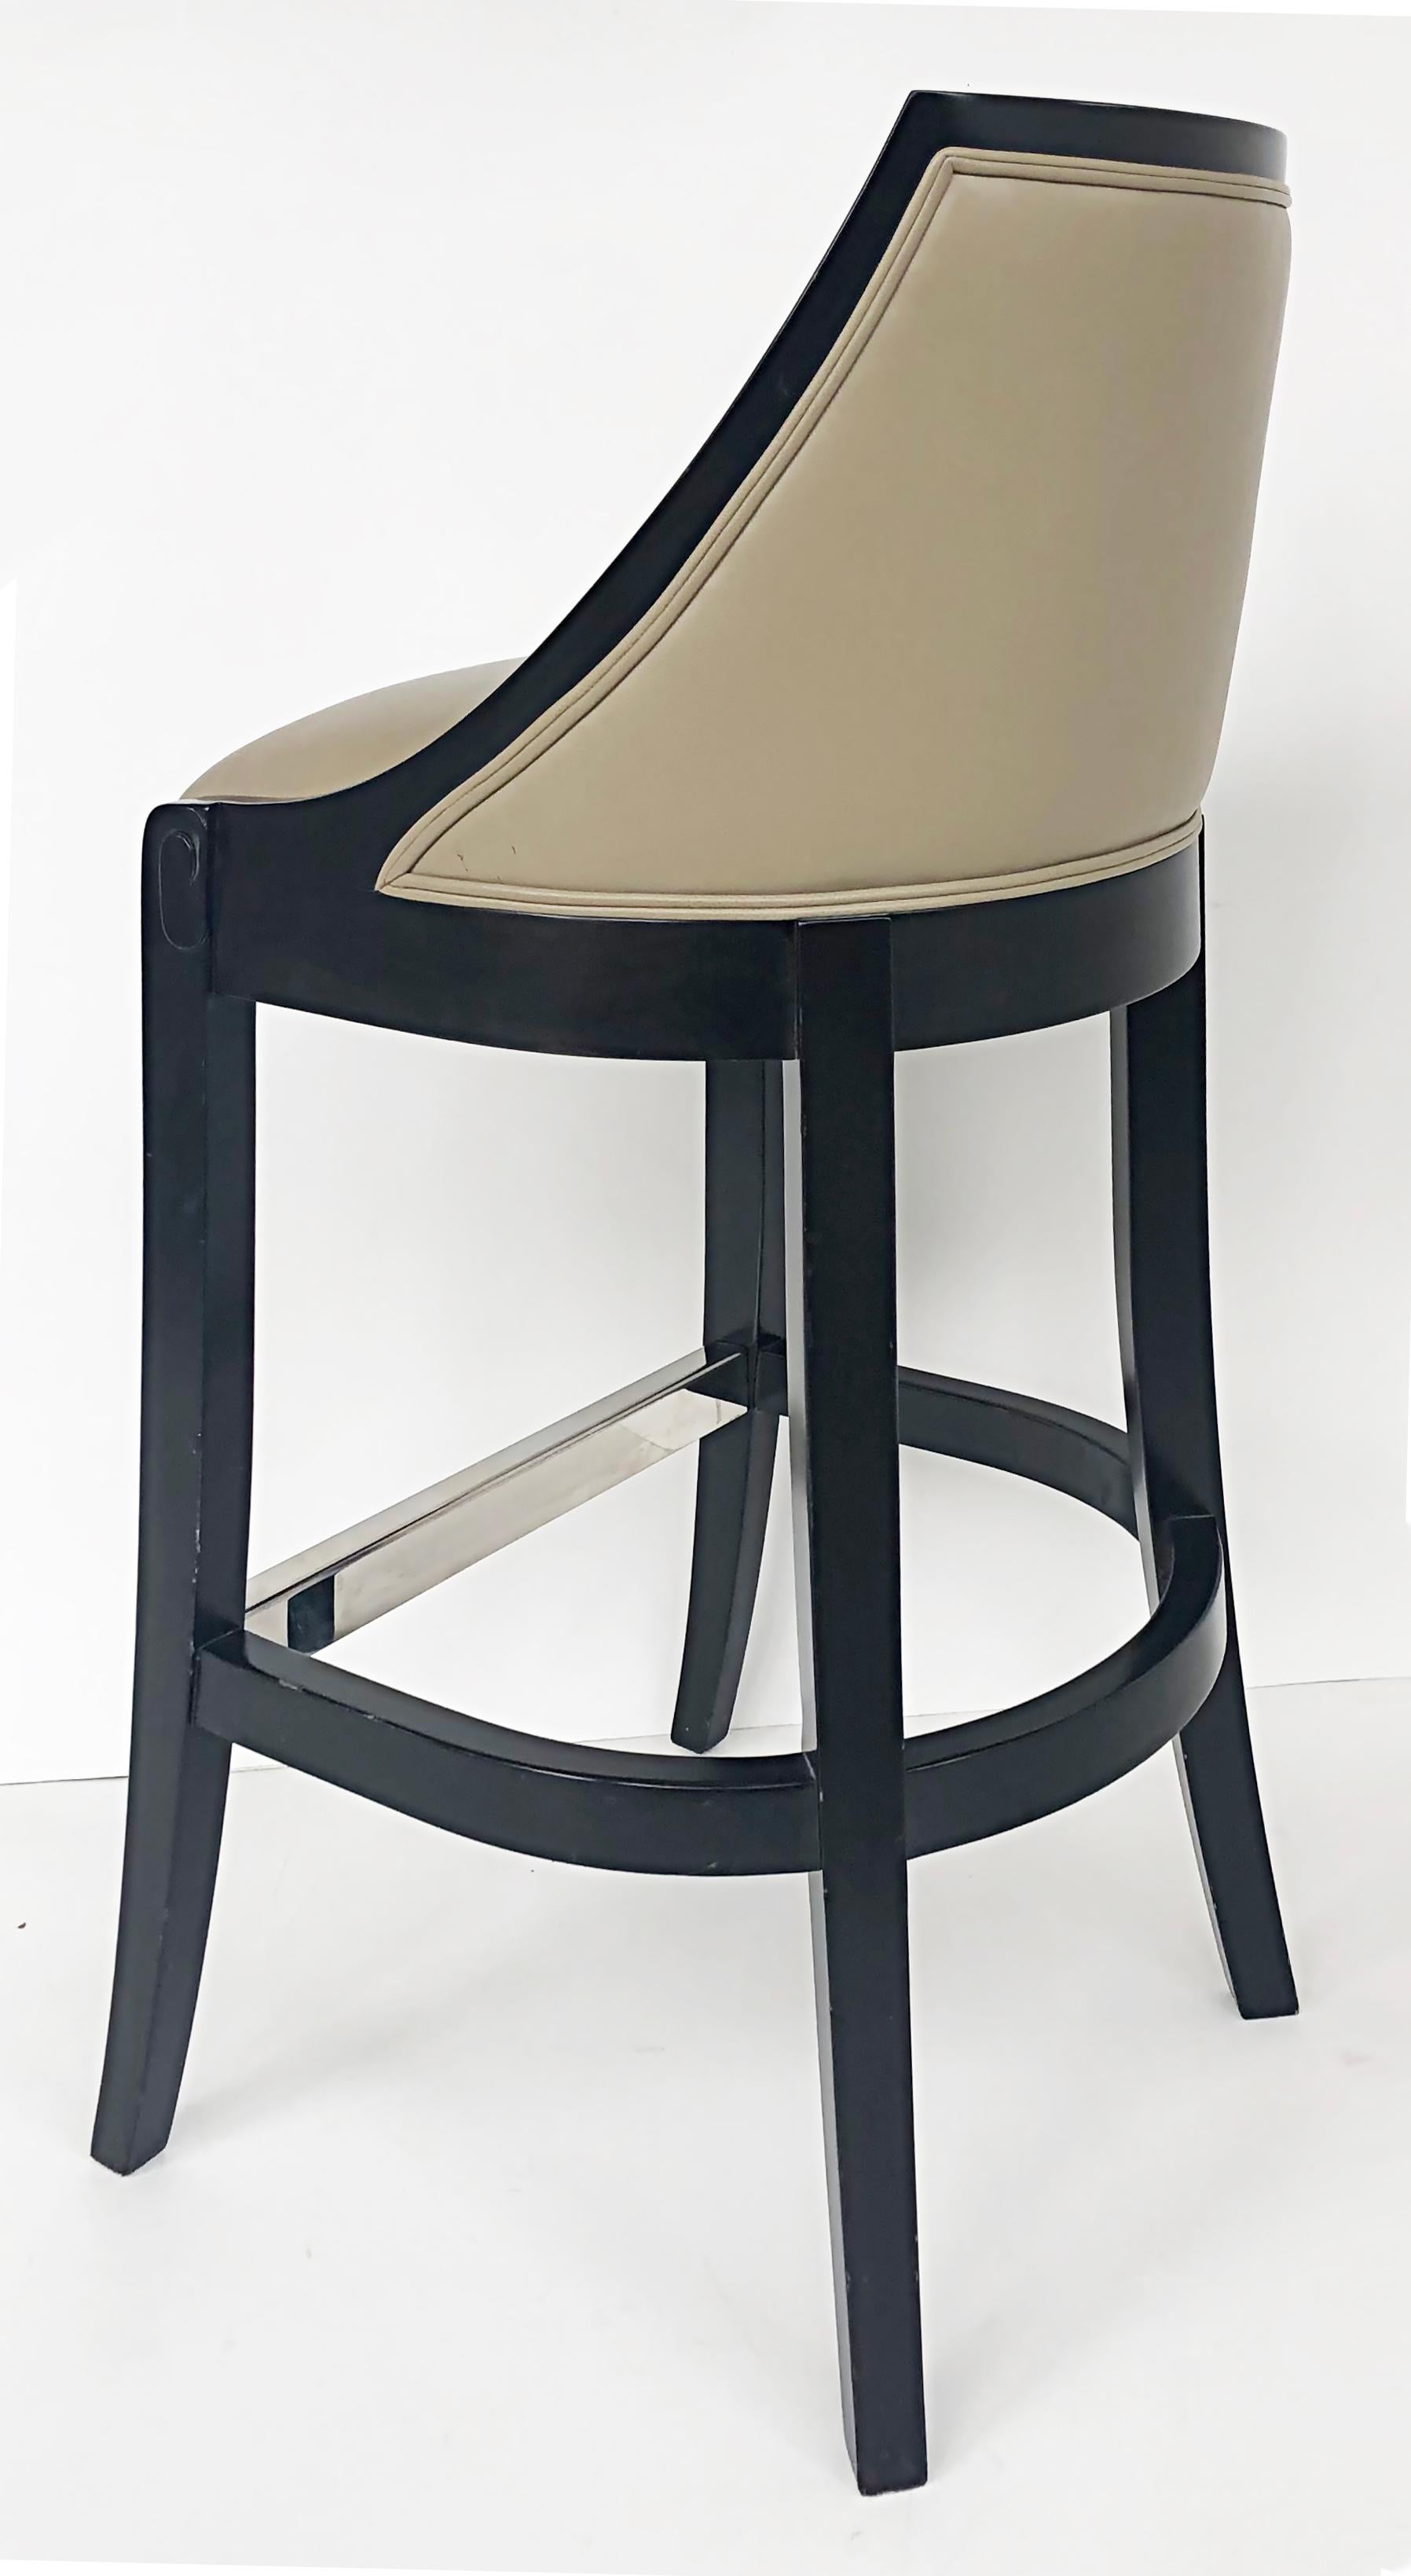 J. Robert Scott Roma Bar Stools in Black Lacquered and Goose Down, Pair 1